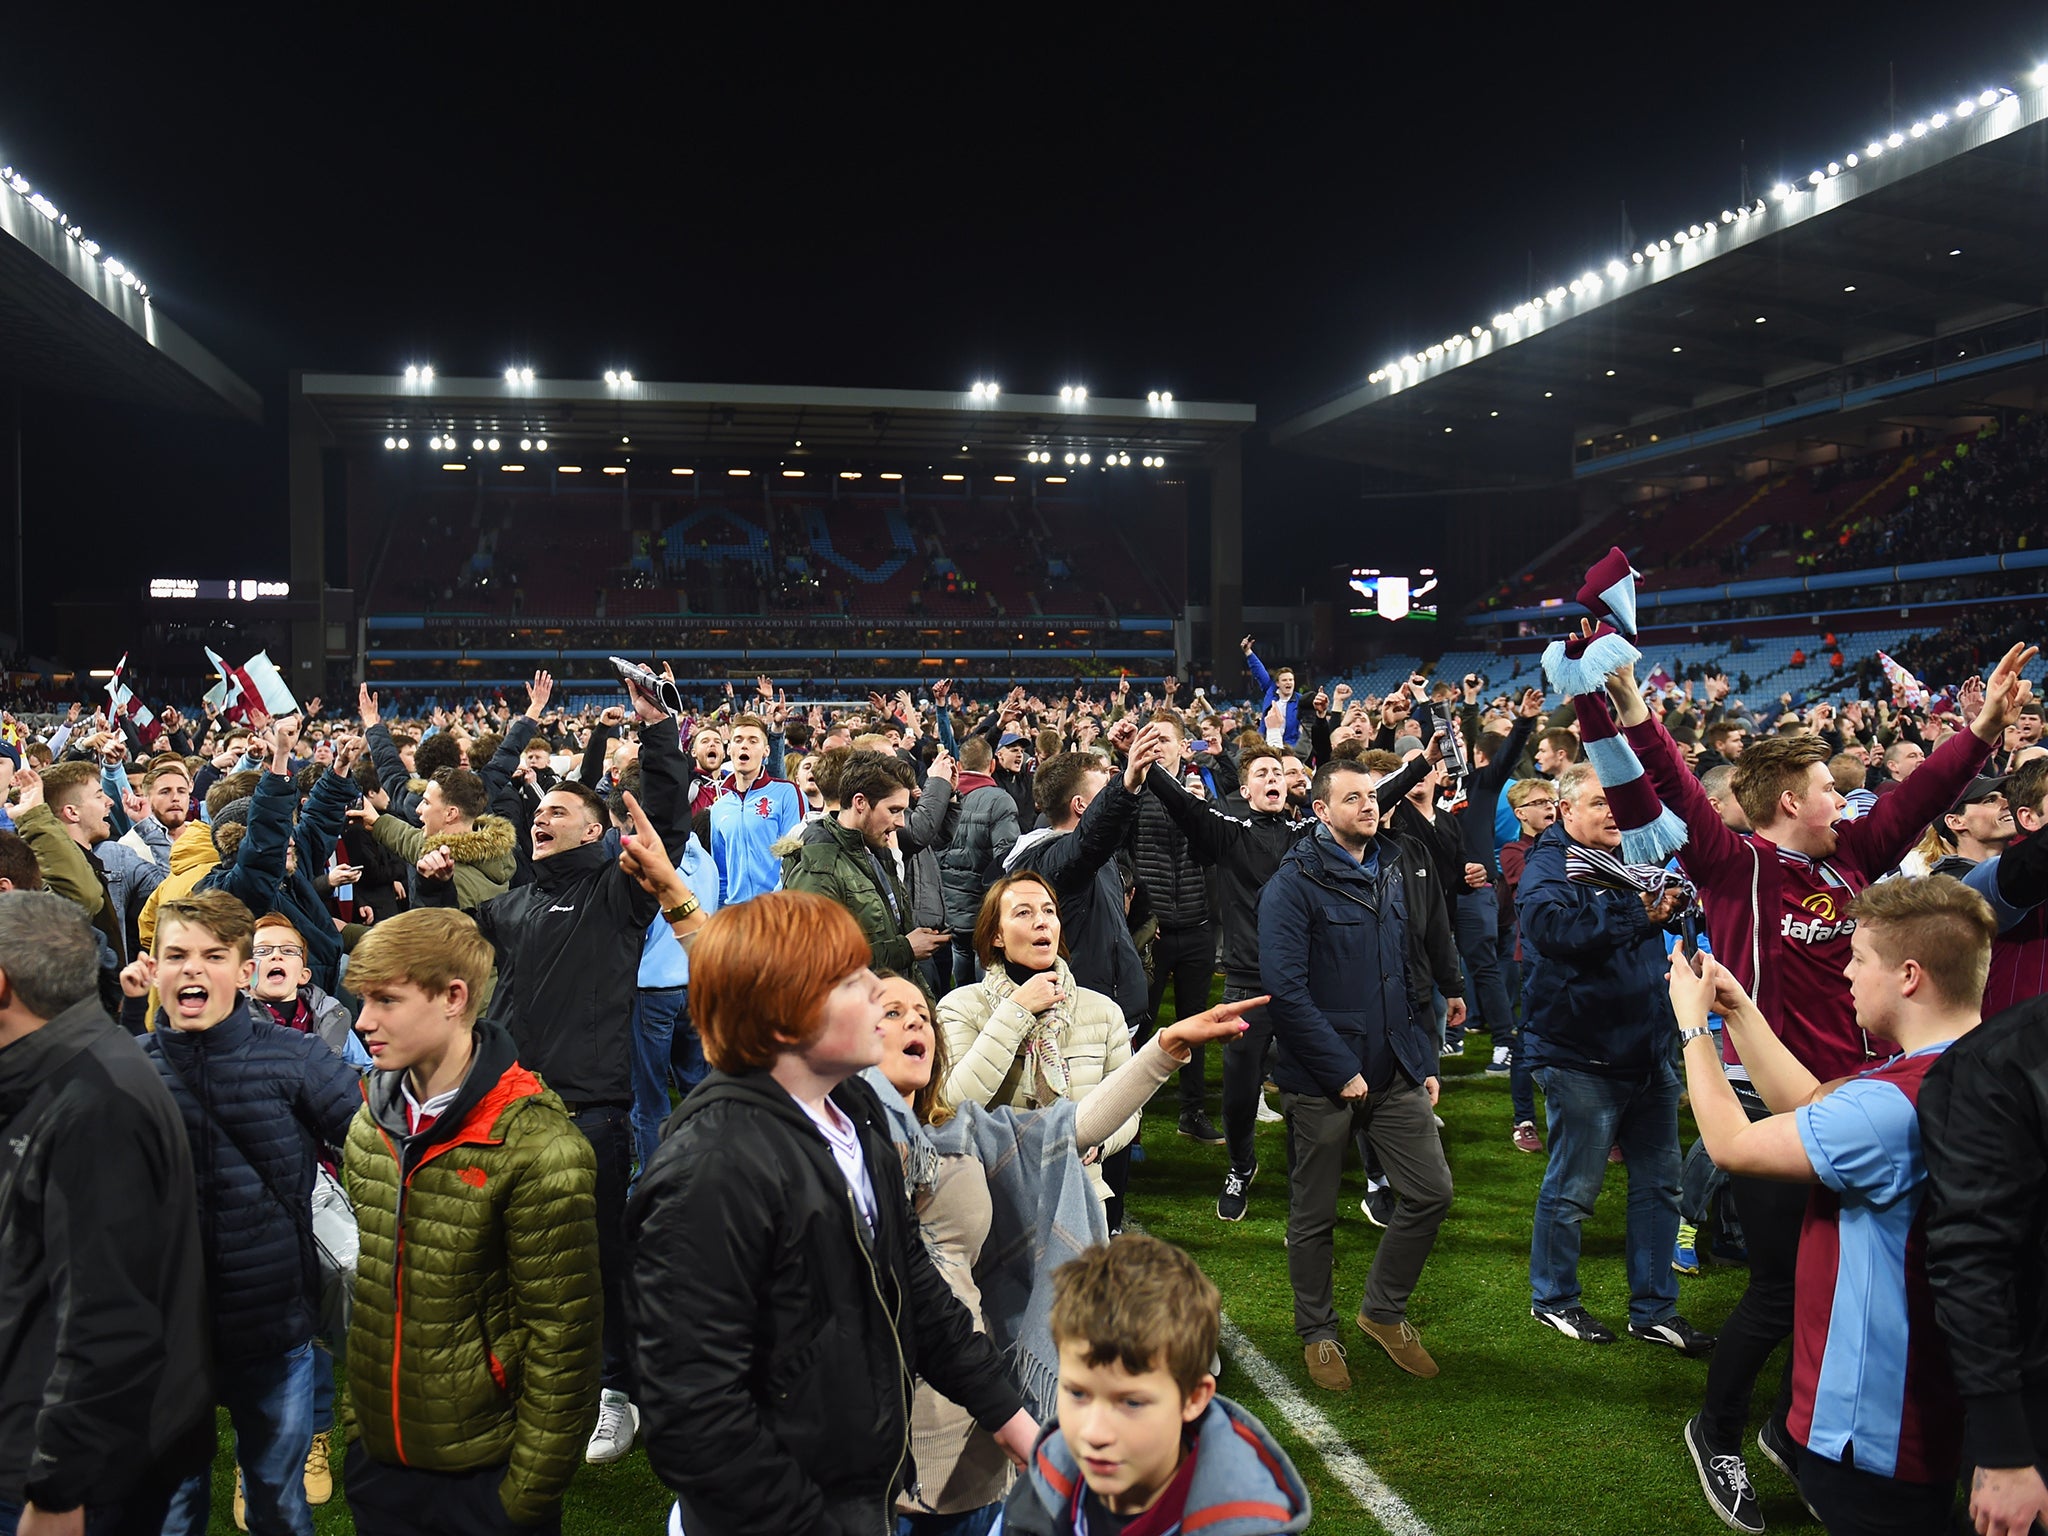 A view of the scenes as fans entered the pitch during Aston Villa's FA Cup tie with West Brom